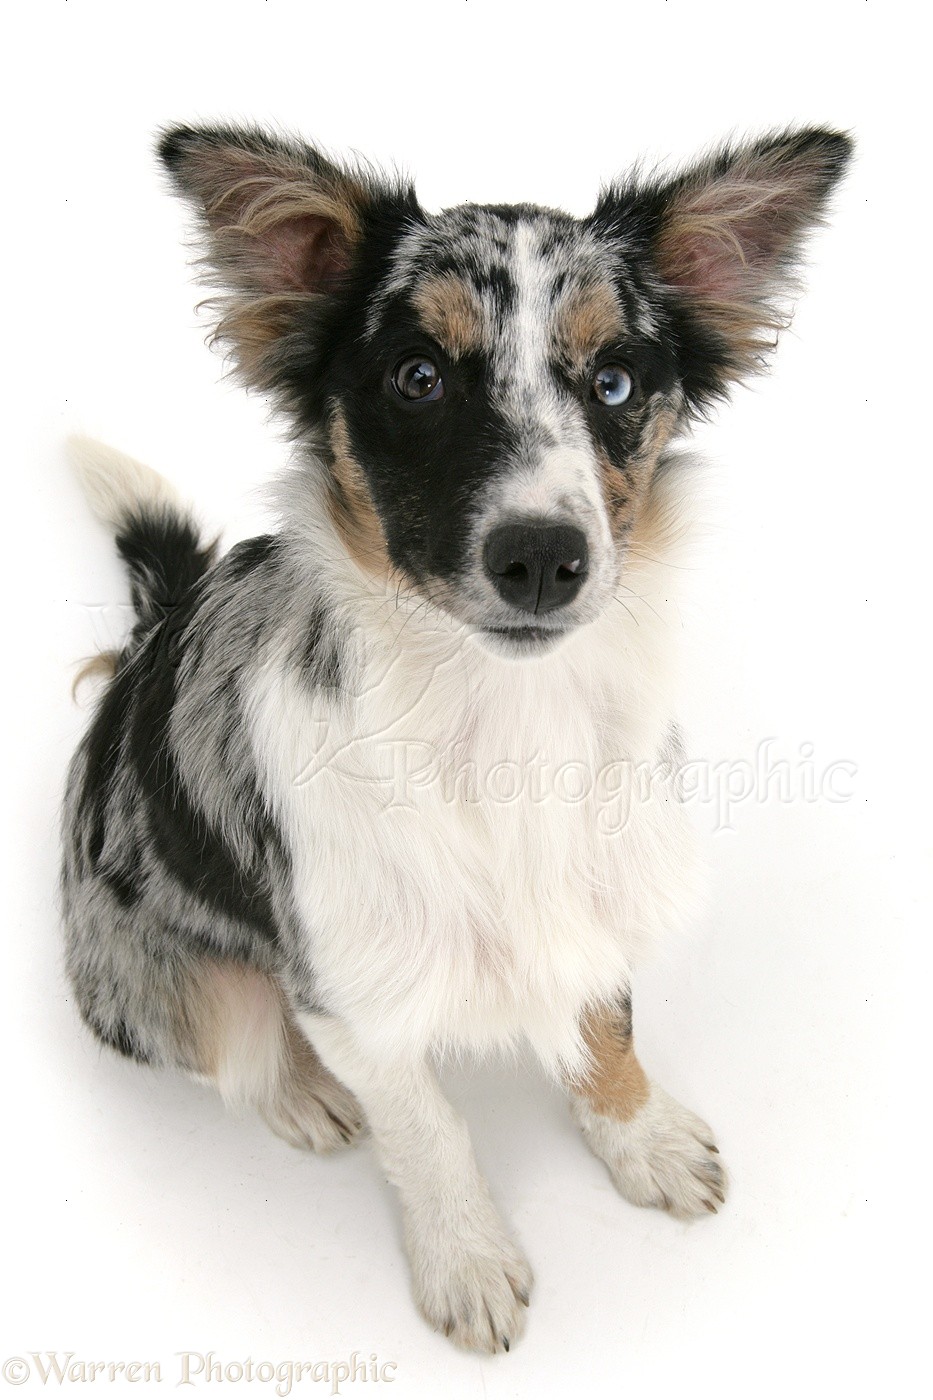 Dog: Merle Collie-cross pup sitting and looking up photo WP47660